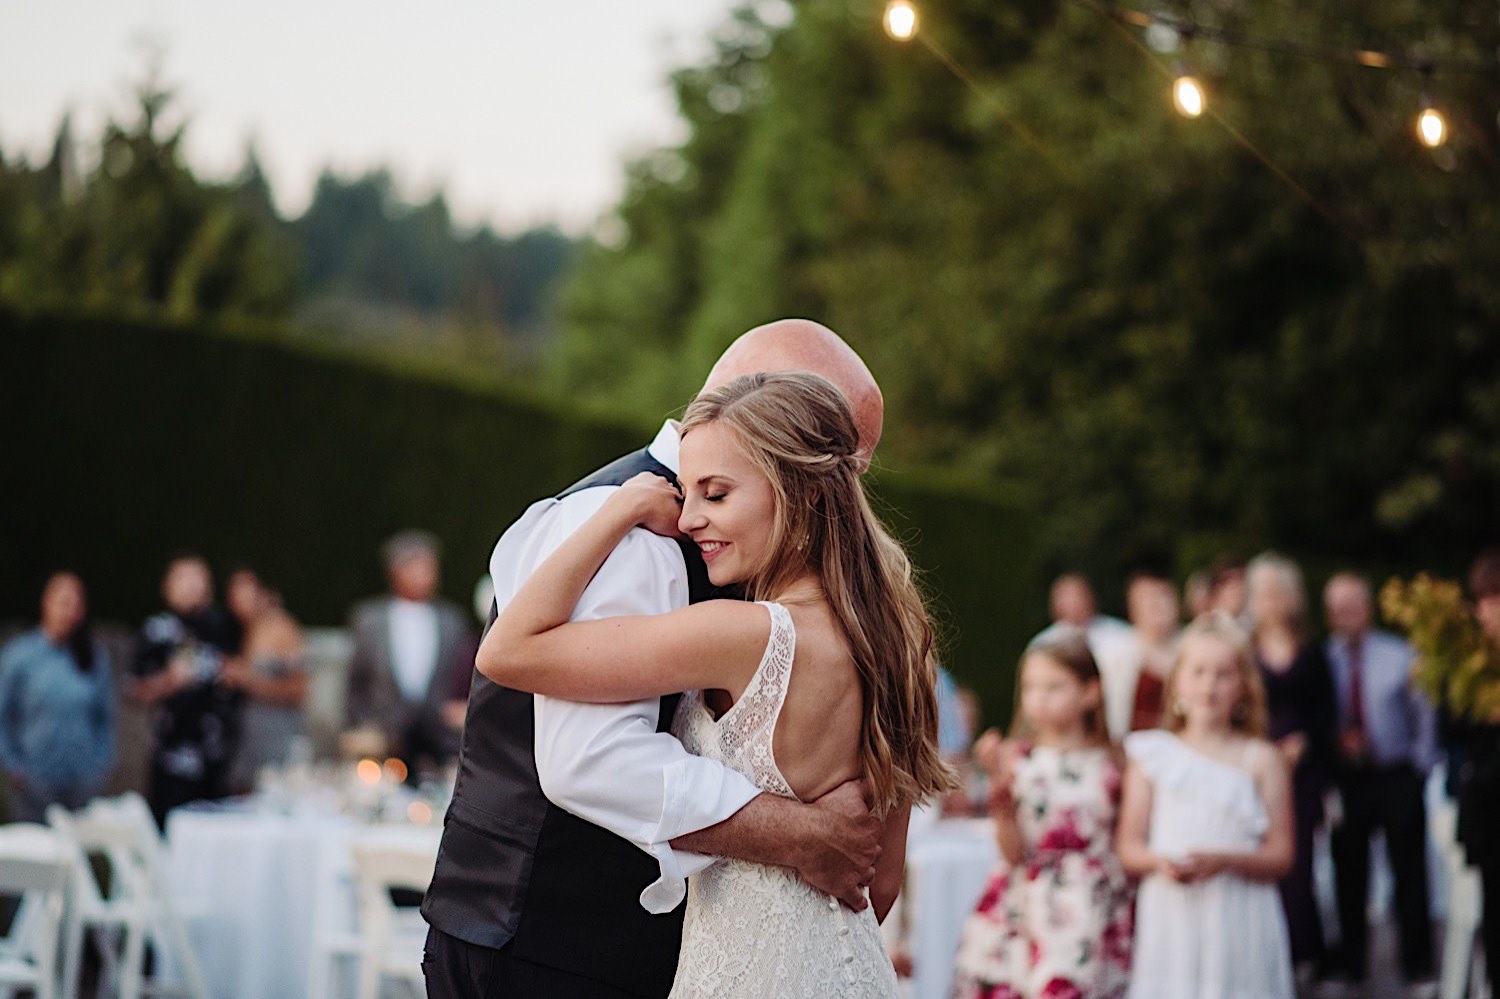 father daughter dance at wedding reception outdoors at Pine Creek Farms and Nursery